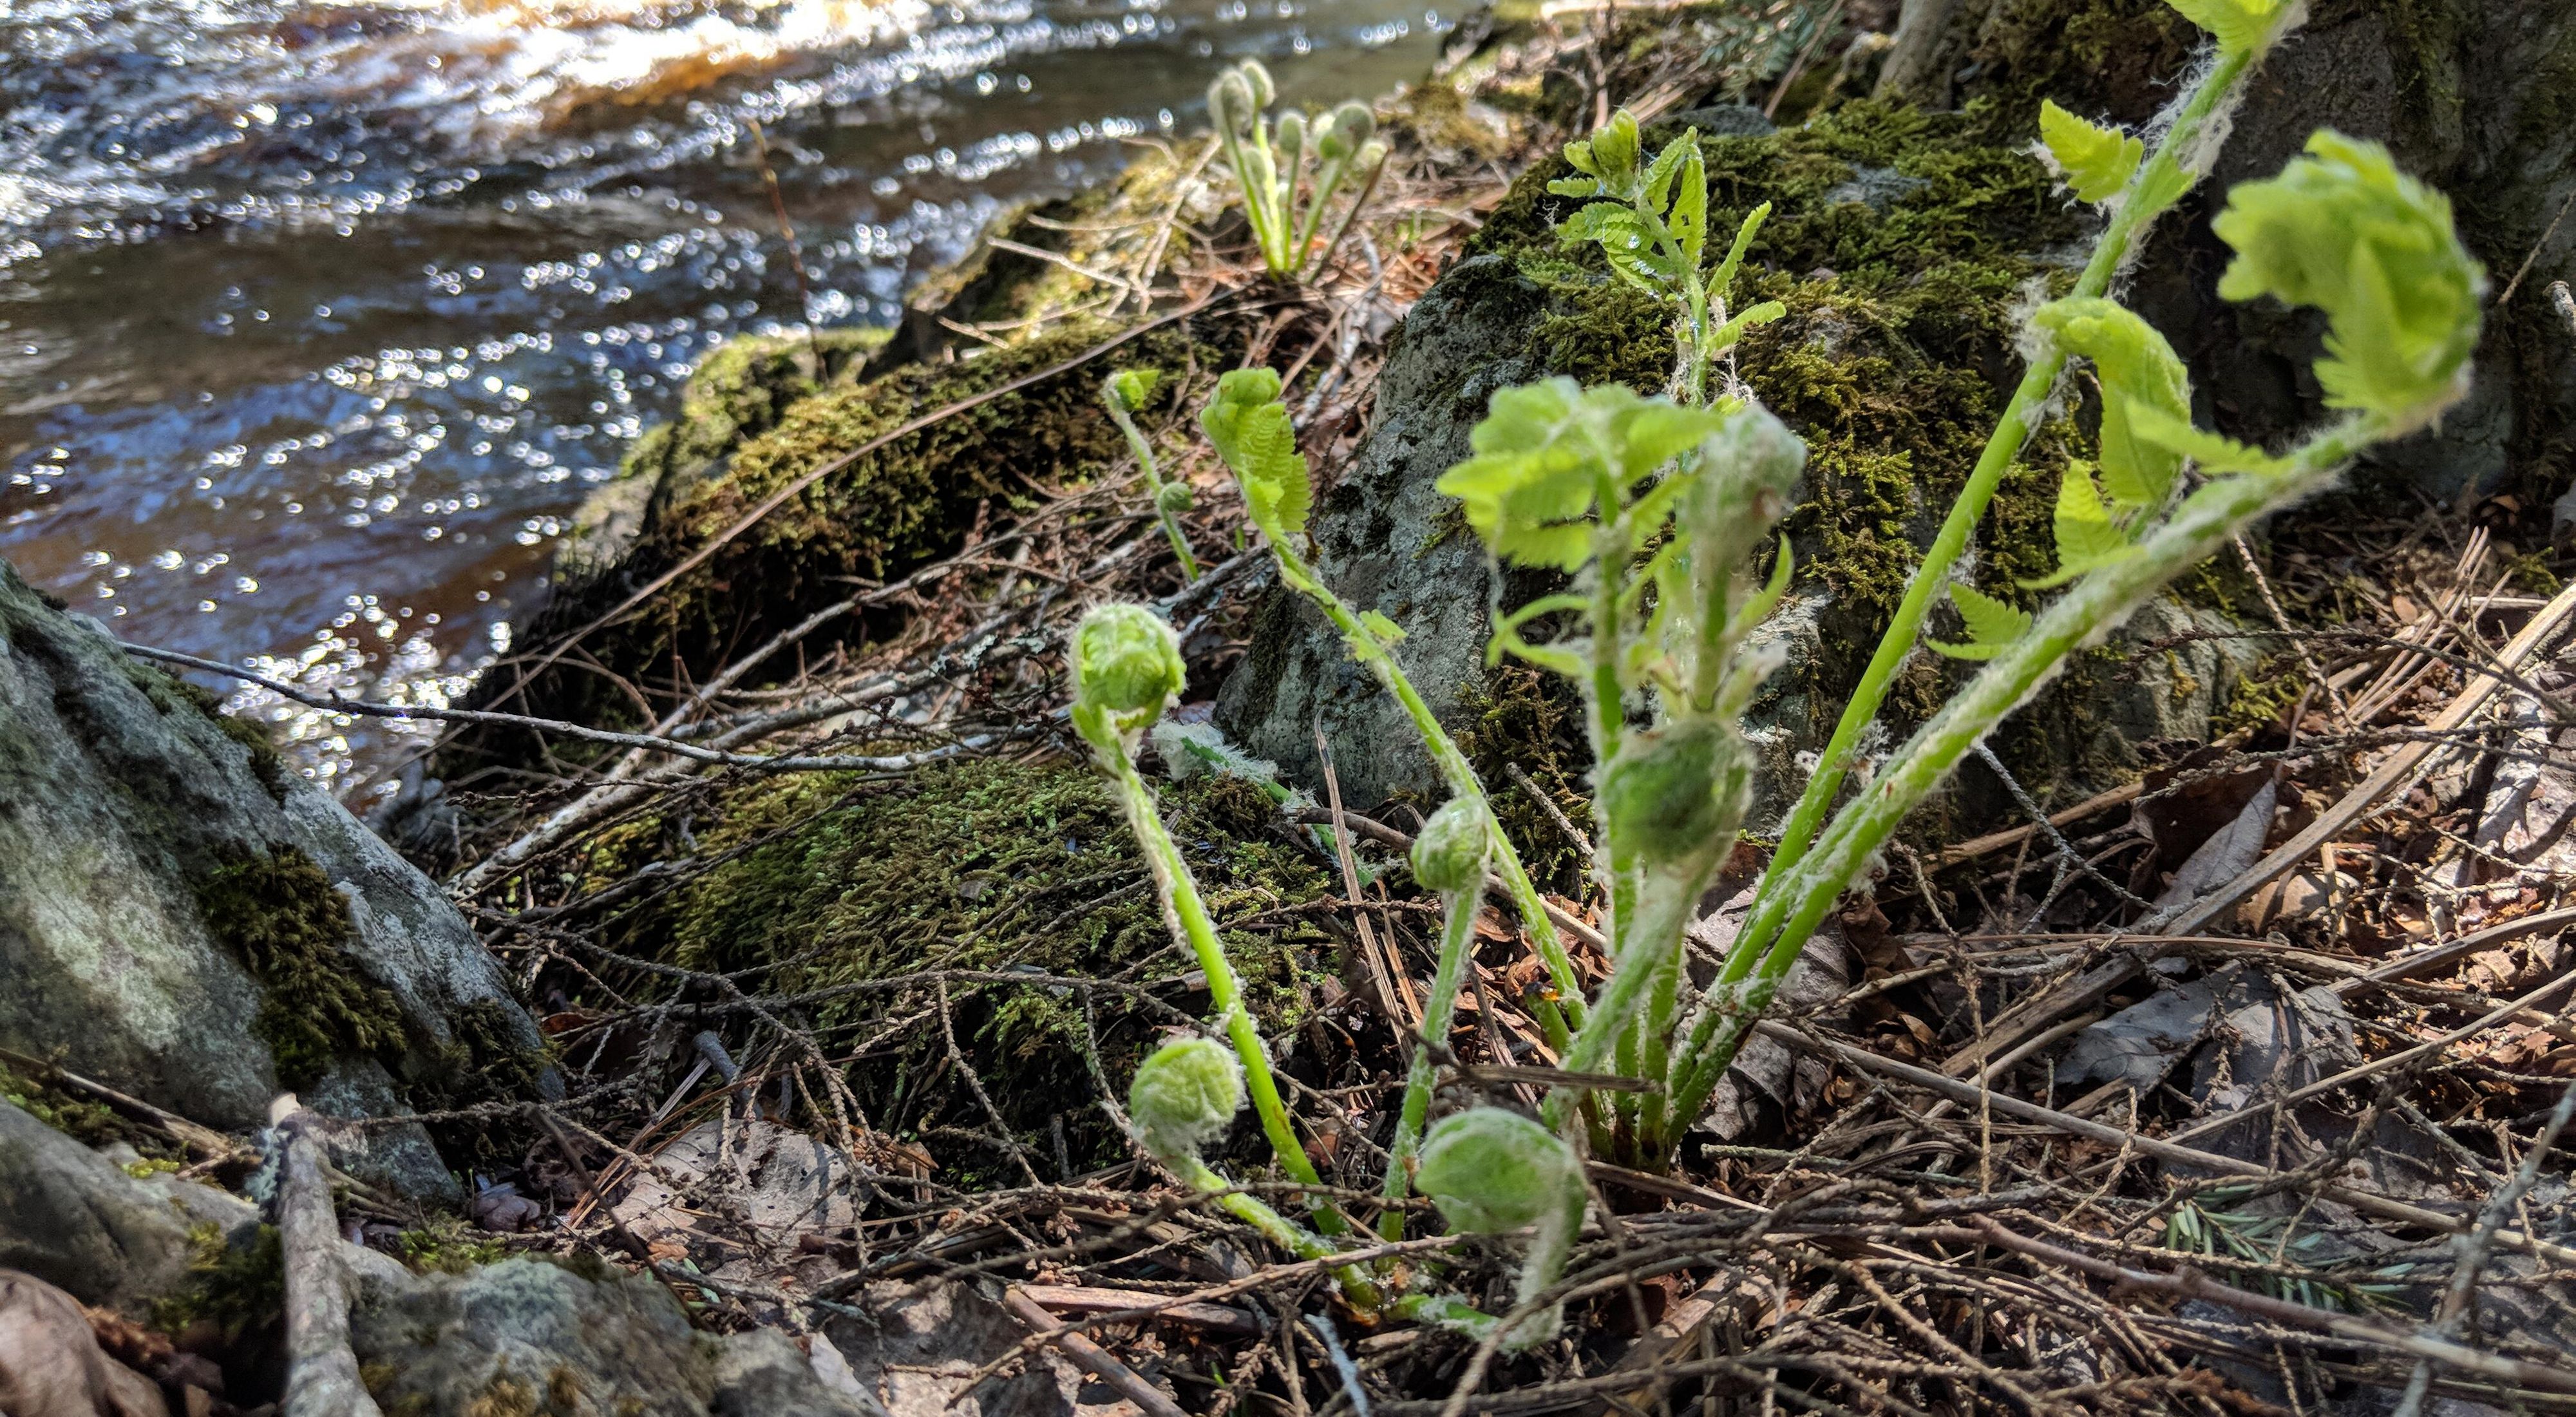 Spring ferns unfold on the banks of a stream.